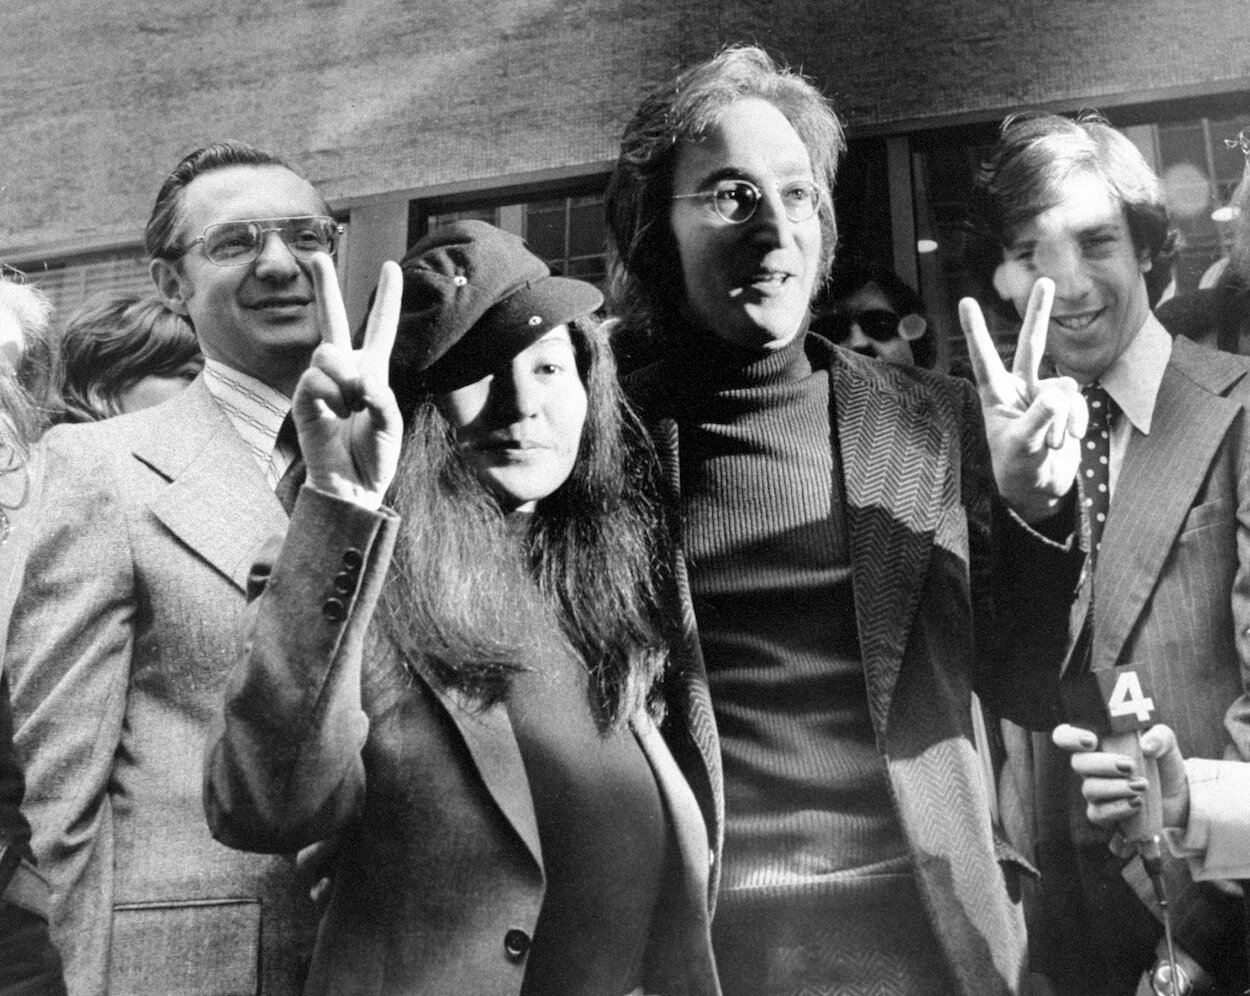 John Lennon (center right) stands next to Yoko Ono as they leave the Immigration and Naturalization Service in New York City in April 1972.